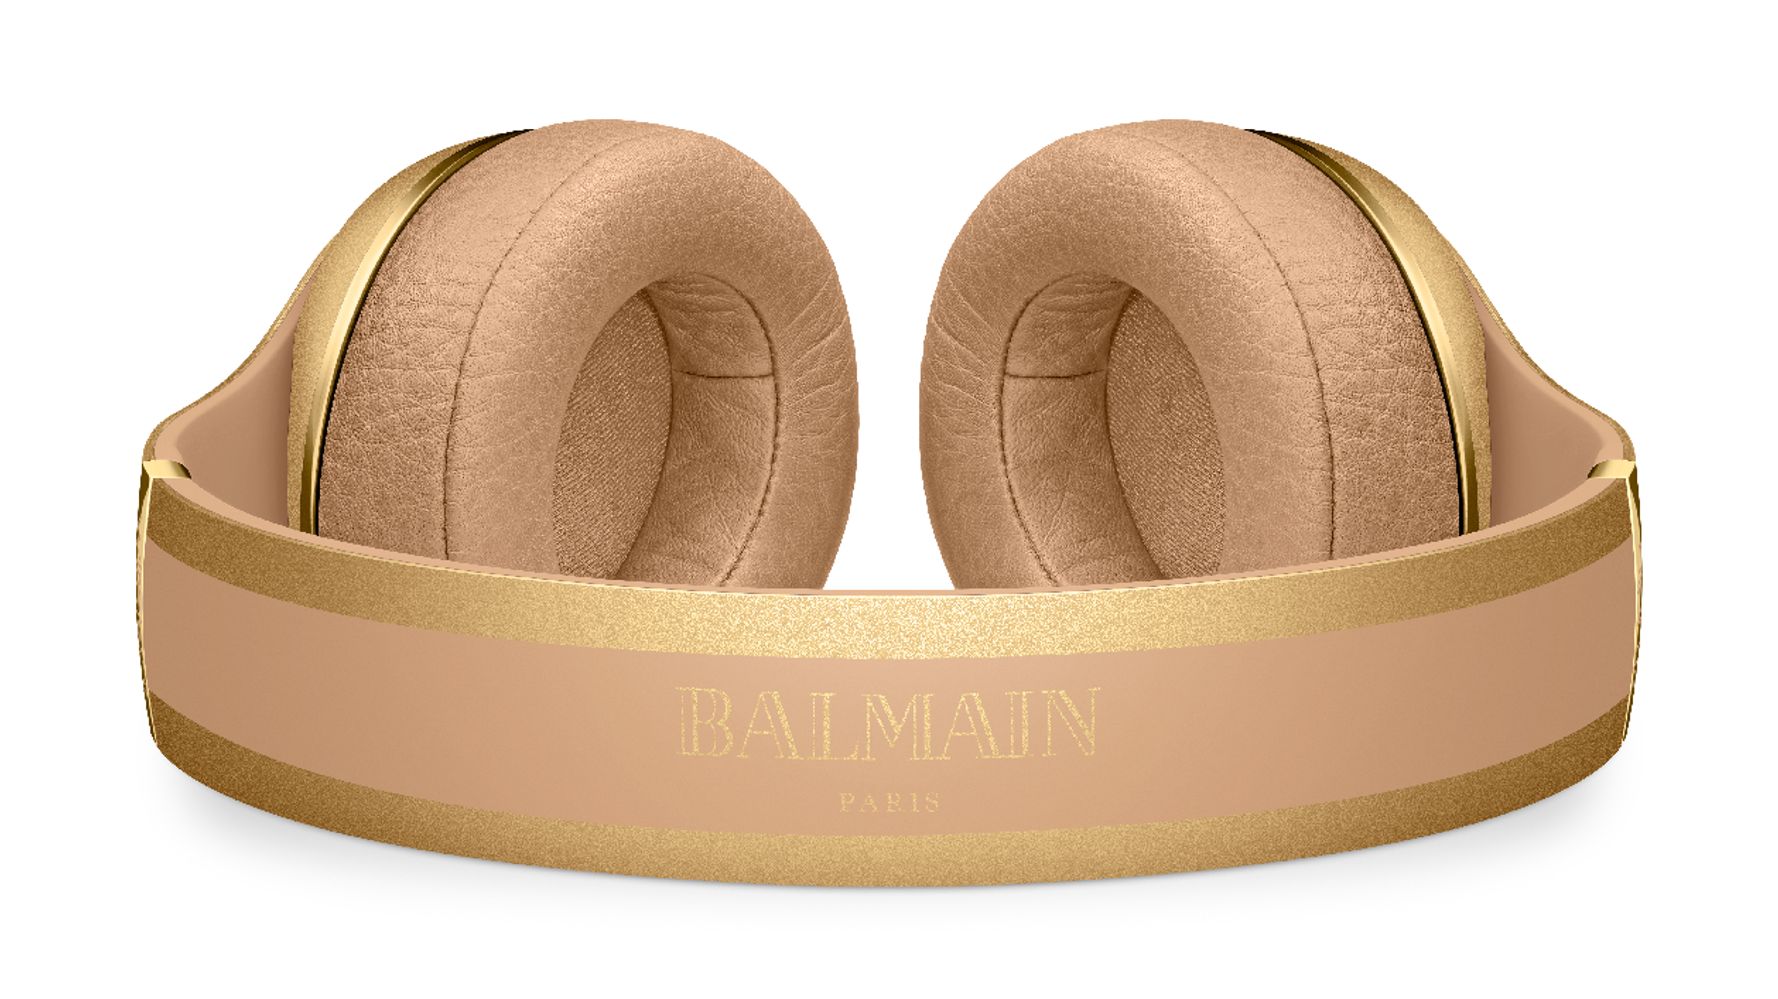 Beats Dr. Dre Have Made Headphones With Fashion Brand Balmain | Style